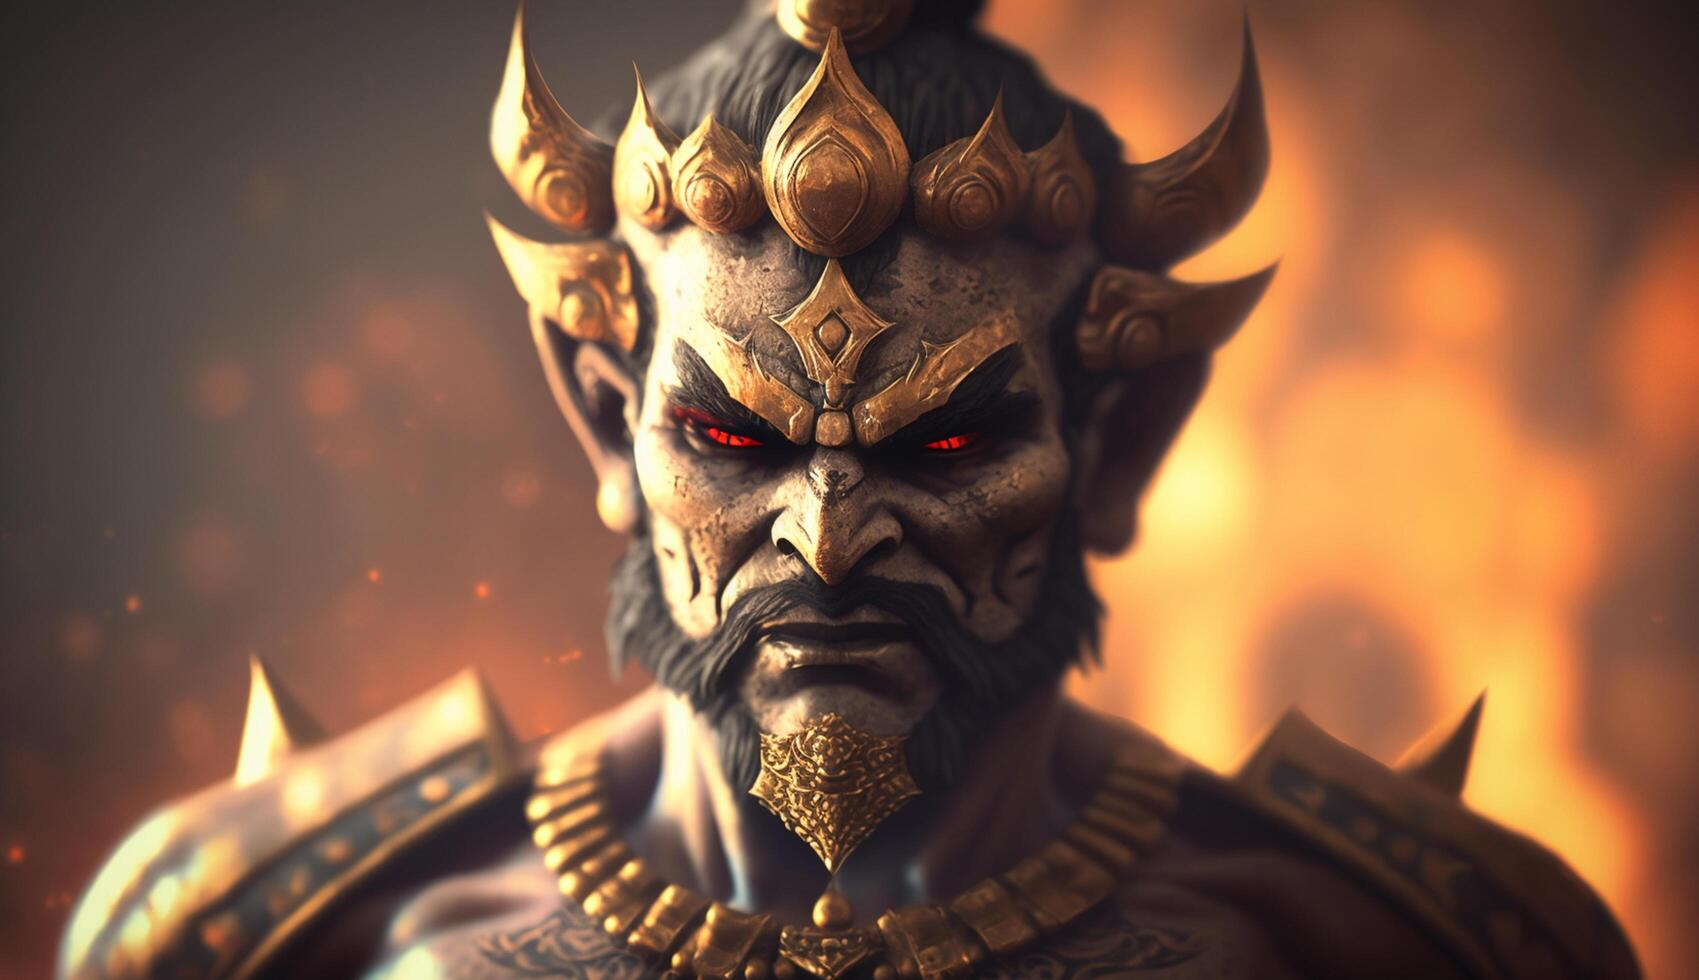 The Mighty Ravana A Stunning Portrait of the Mythical Indian Demon King photo